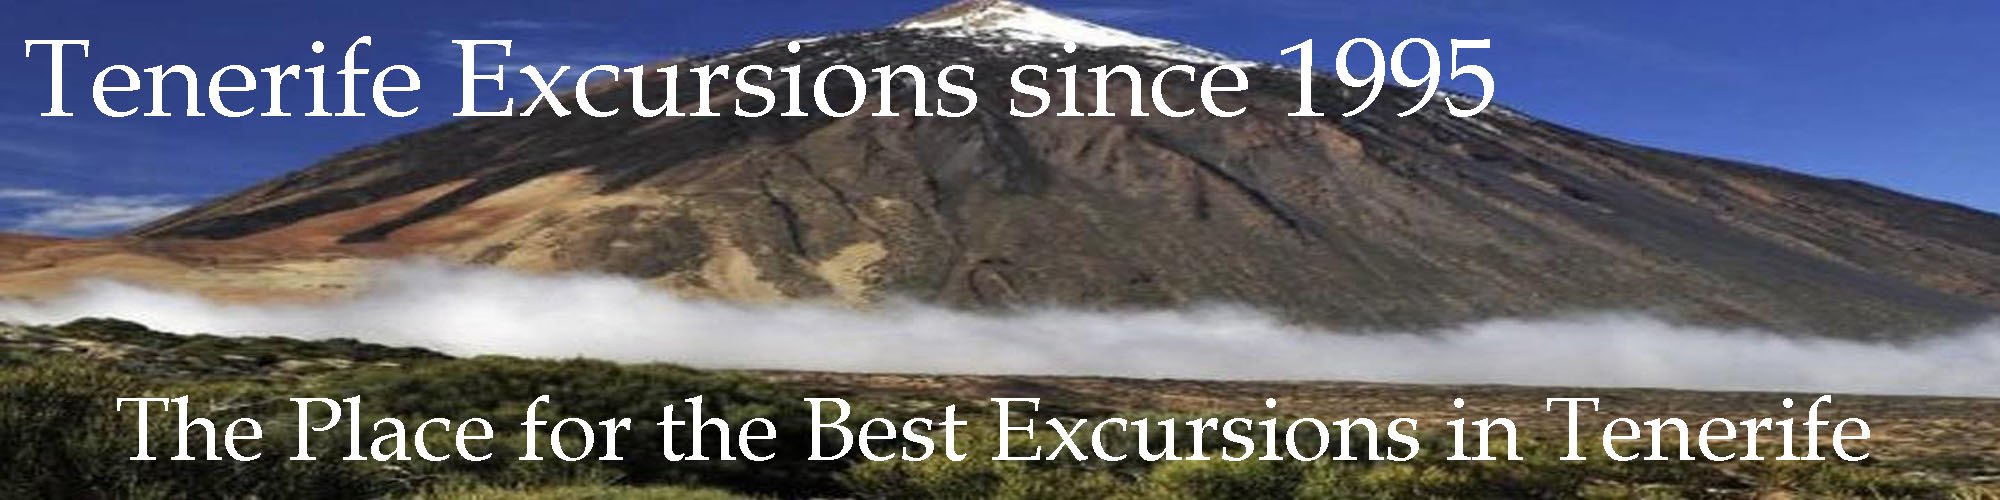 Tenerife Excursions The Place for the Best excursions available